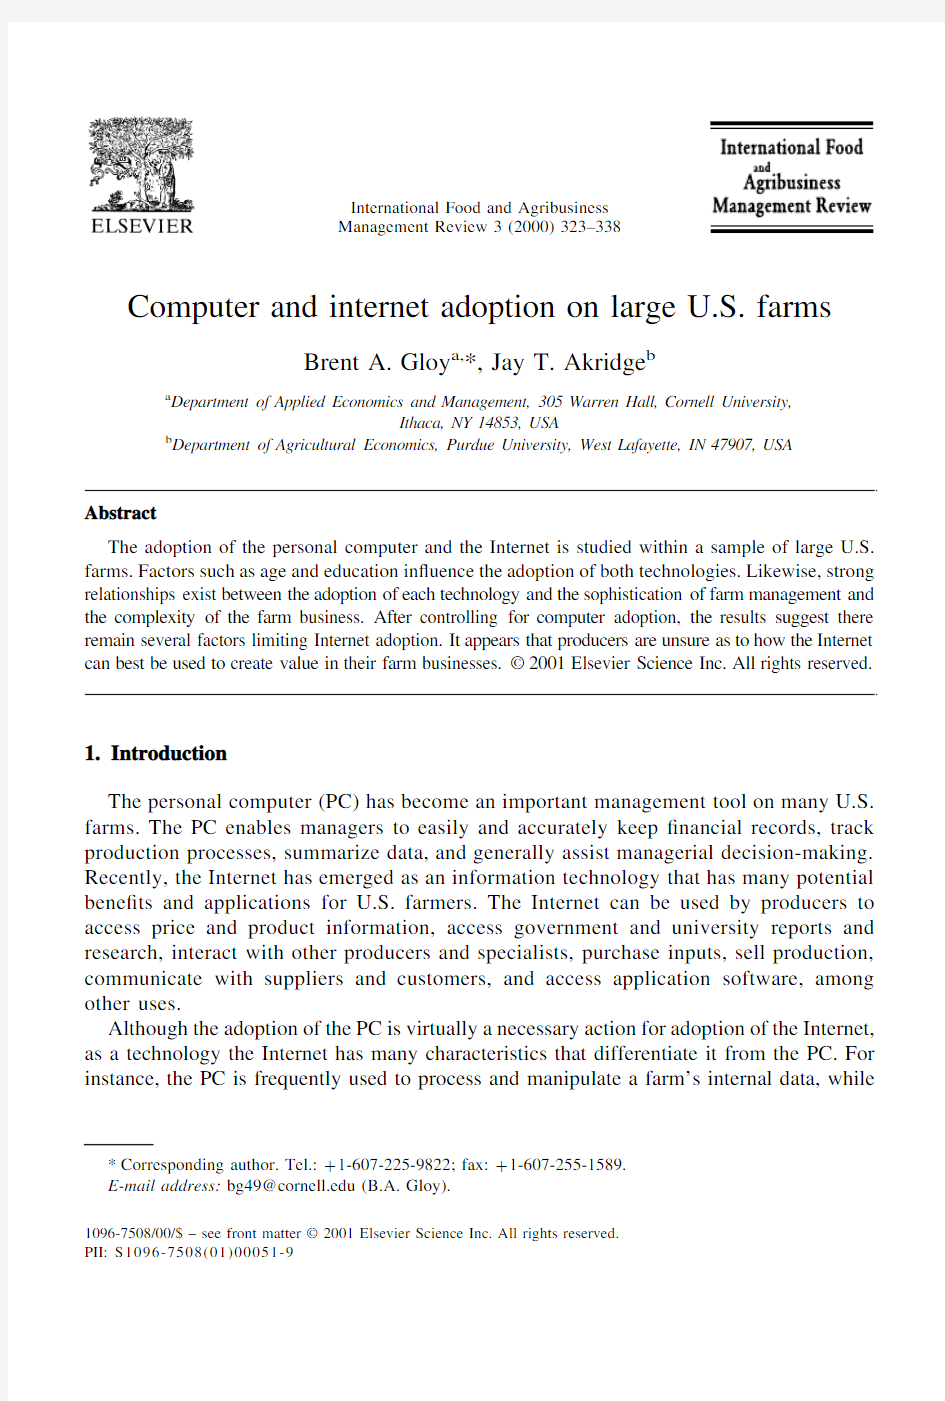 Computer and internet adoption on large US farms